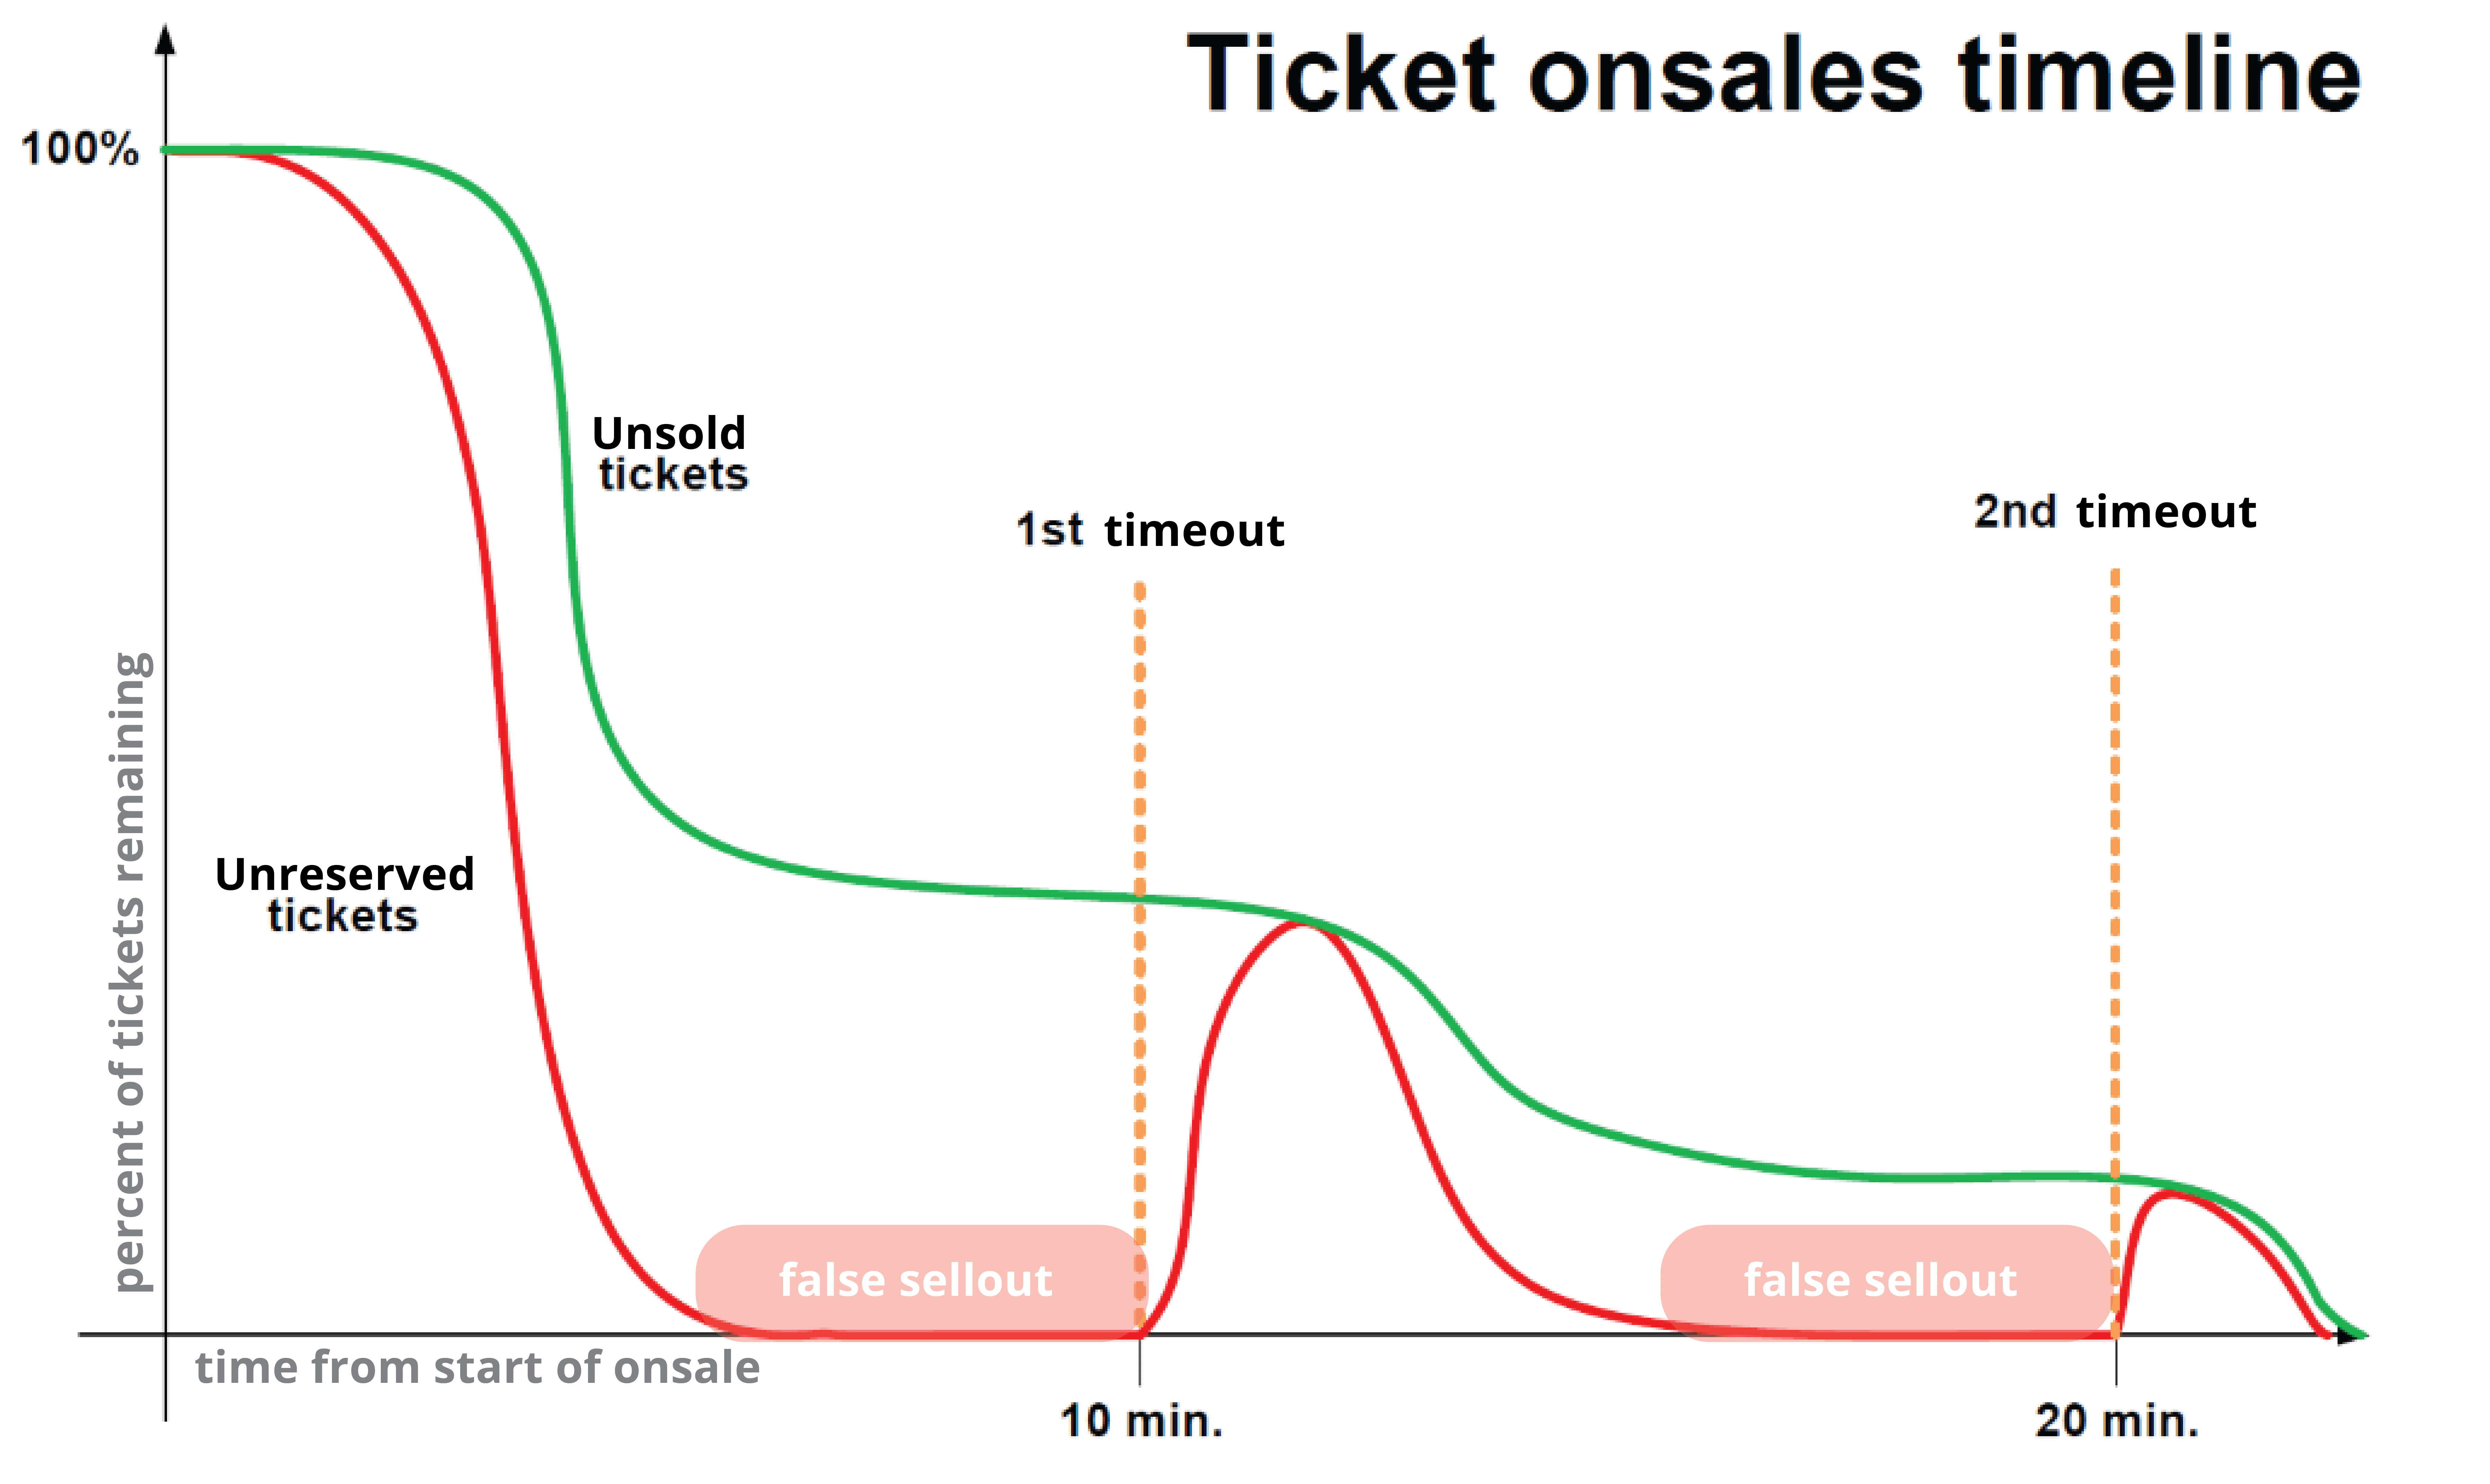 False sellouts during onsale timeline